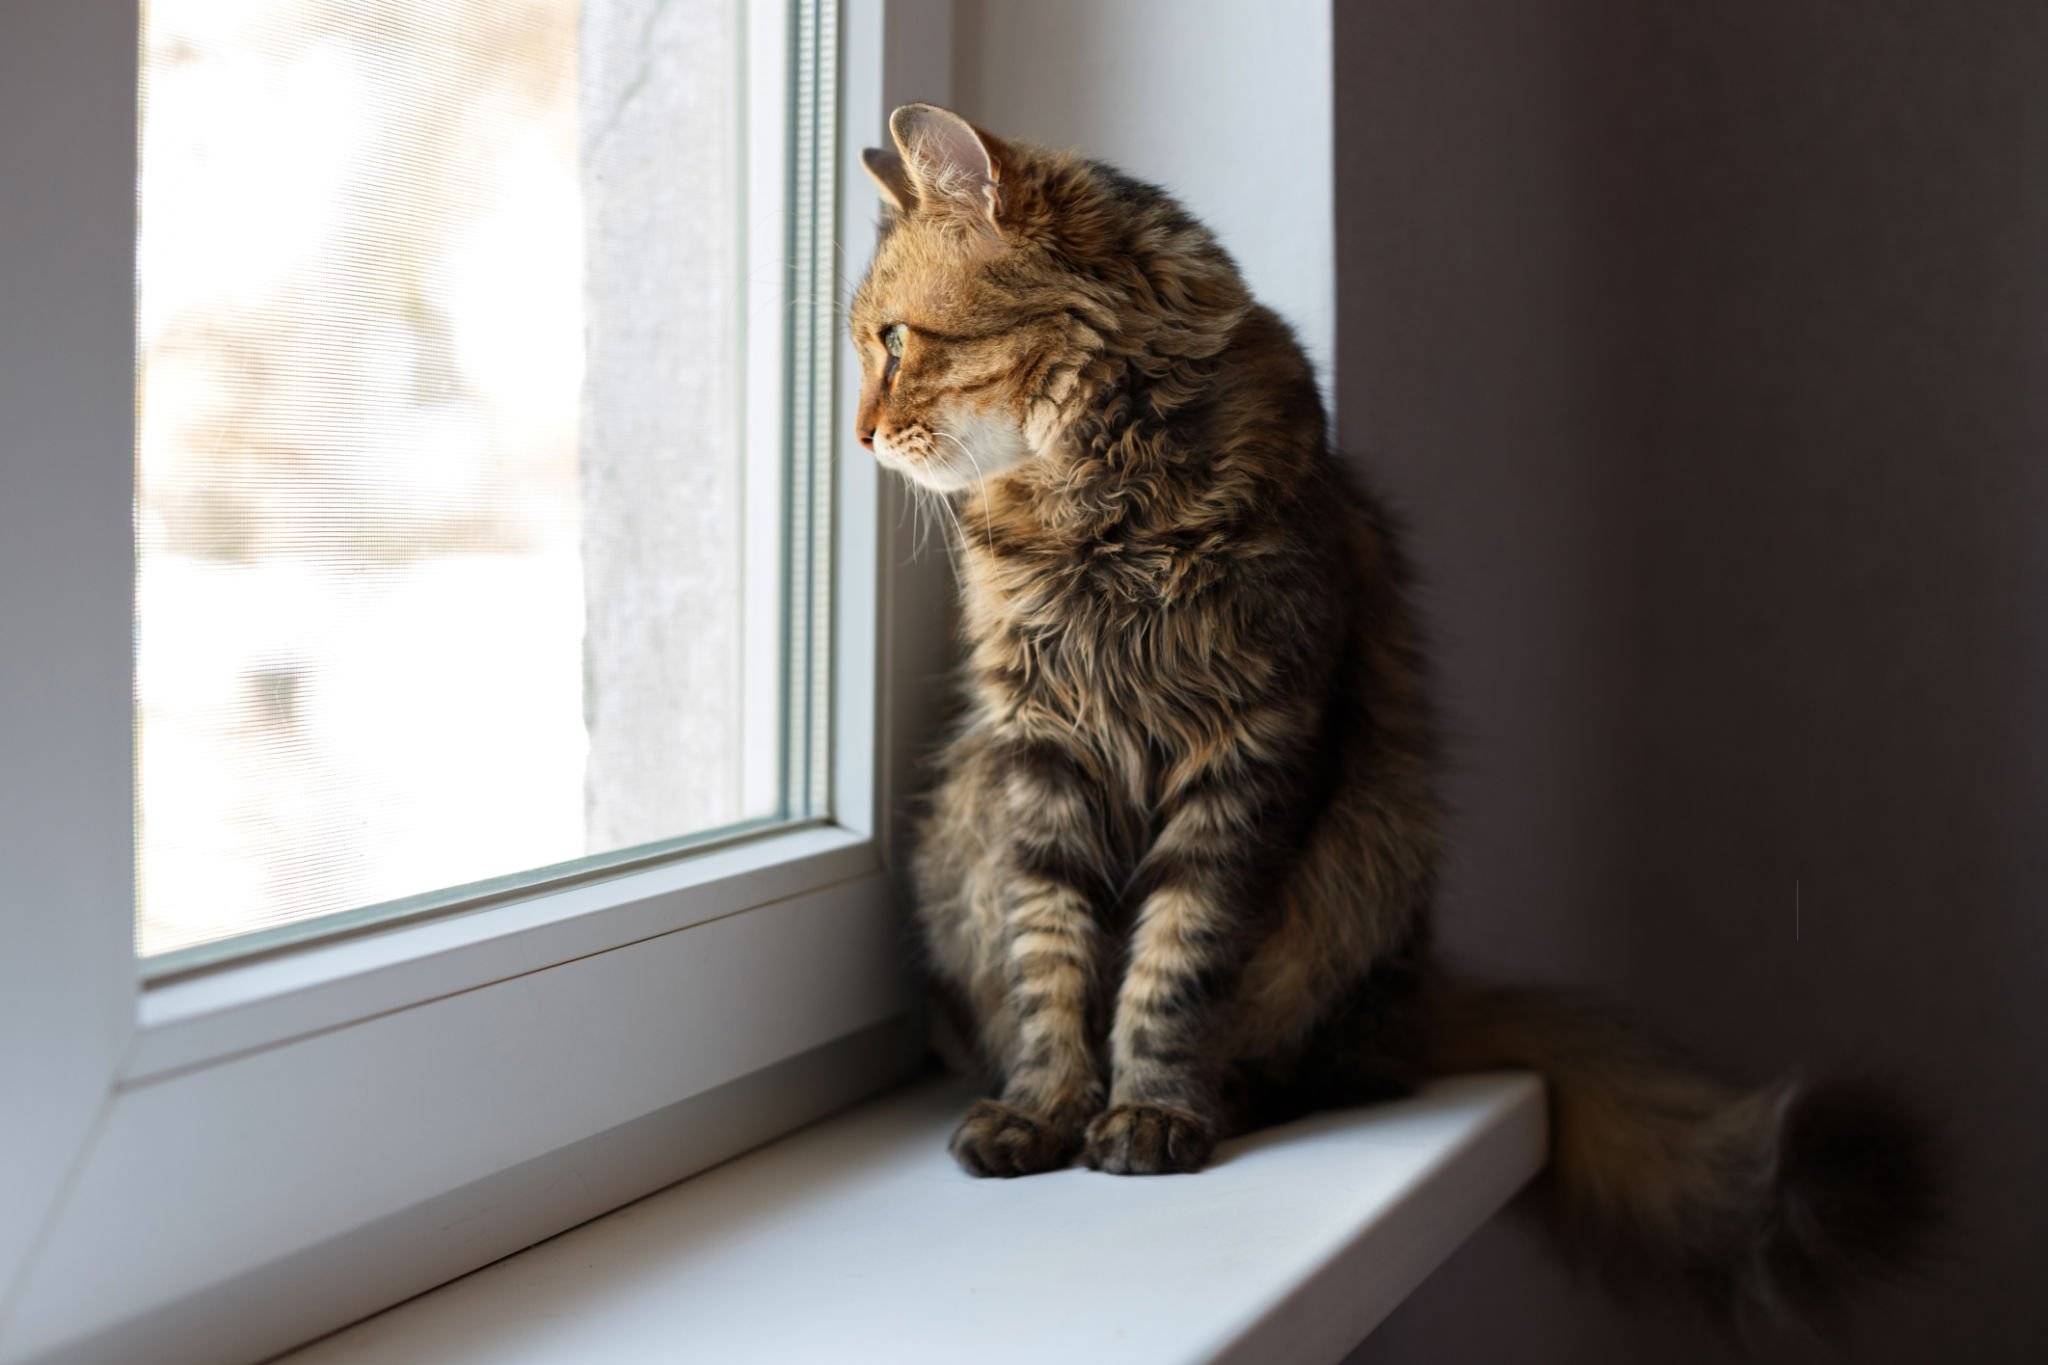 Home alone Cat, left alone Brown domestic cat looks out the window and misses his owners